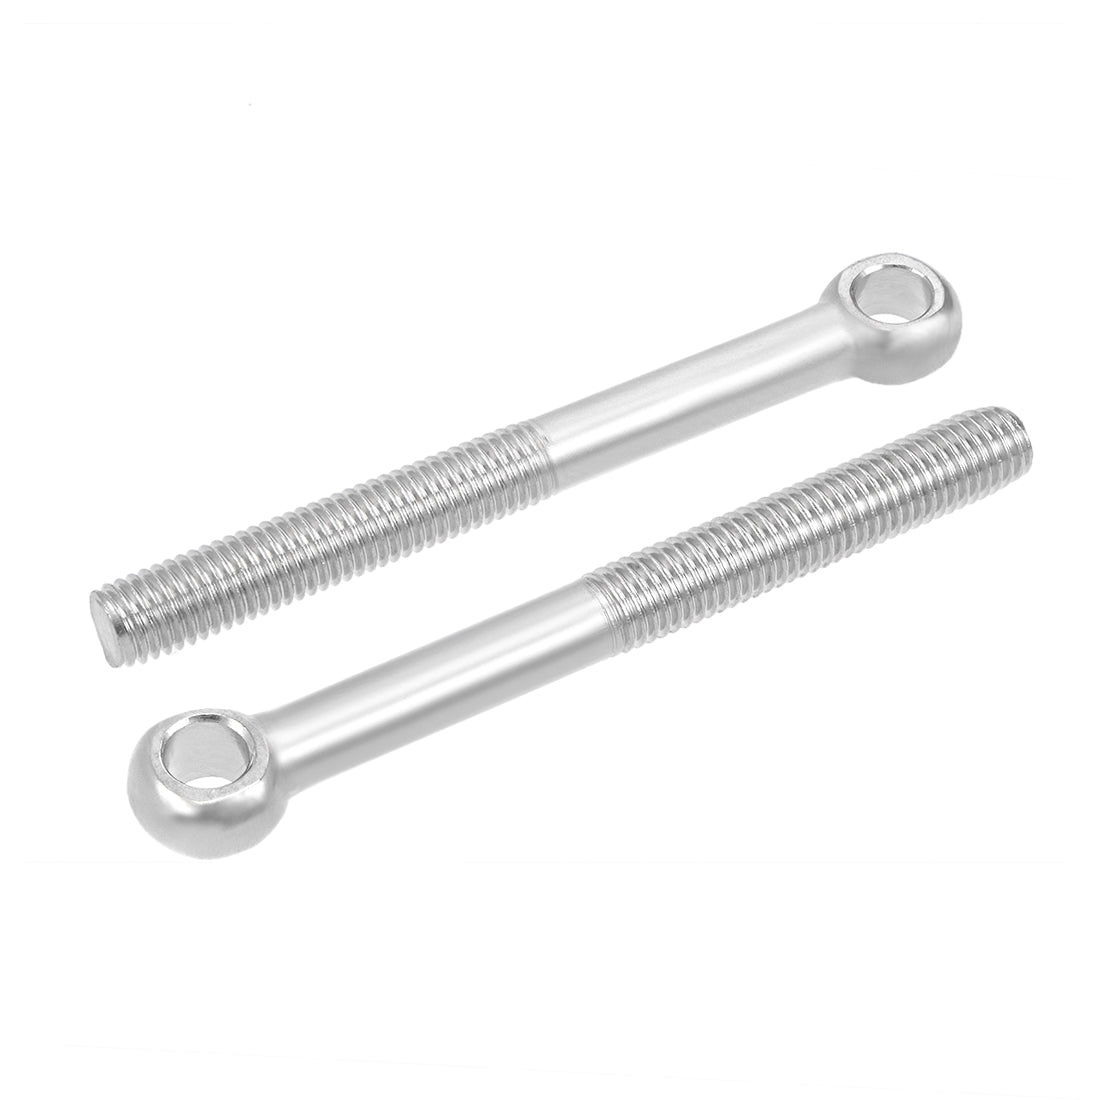 Uxcell Uxcell M12 x 120mm 304 Stainless Steel Machine Shoulder Lift Eye Bolt Rigging 4pcs